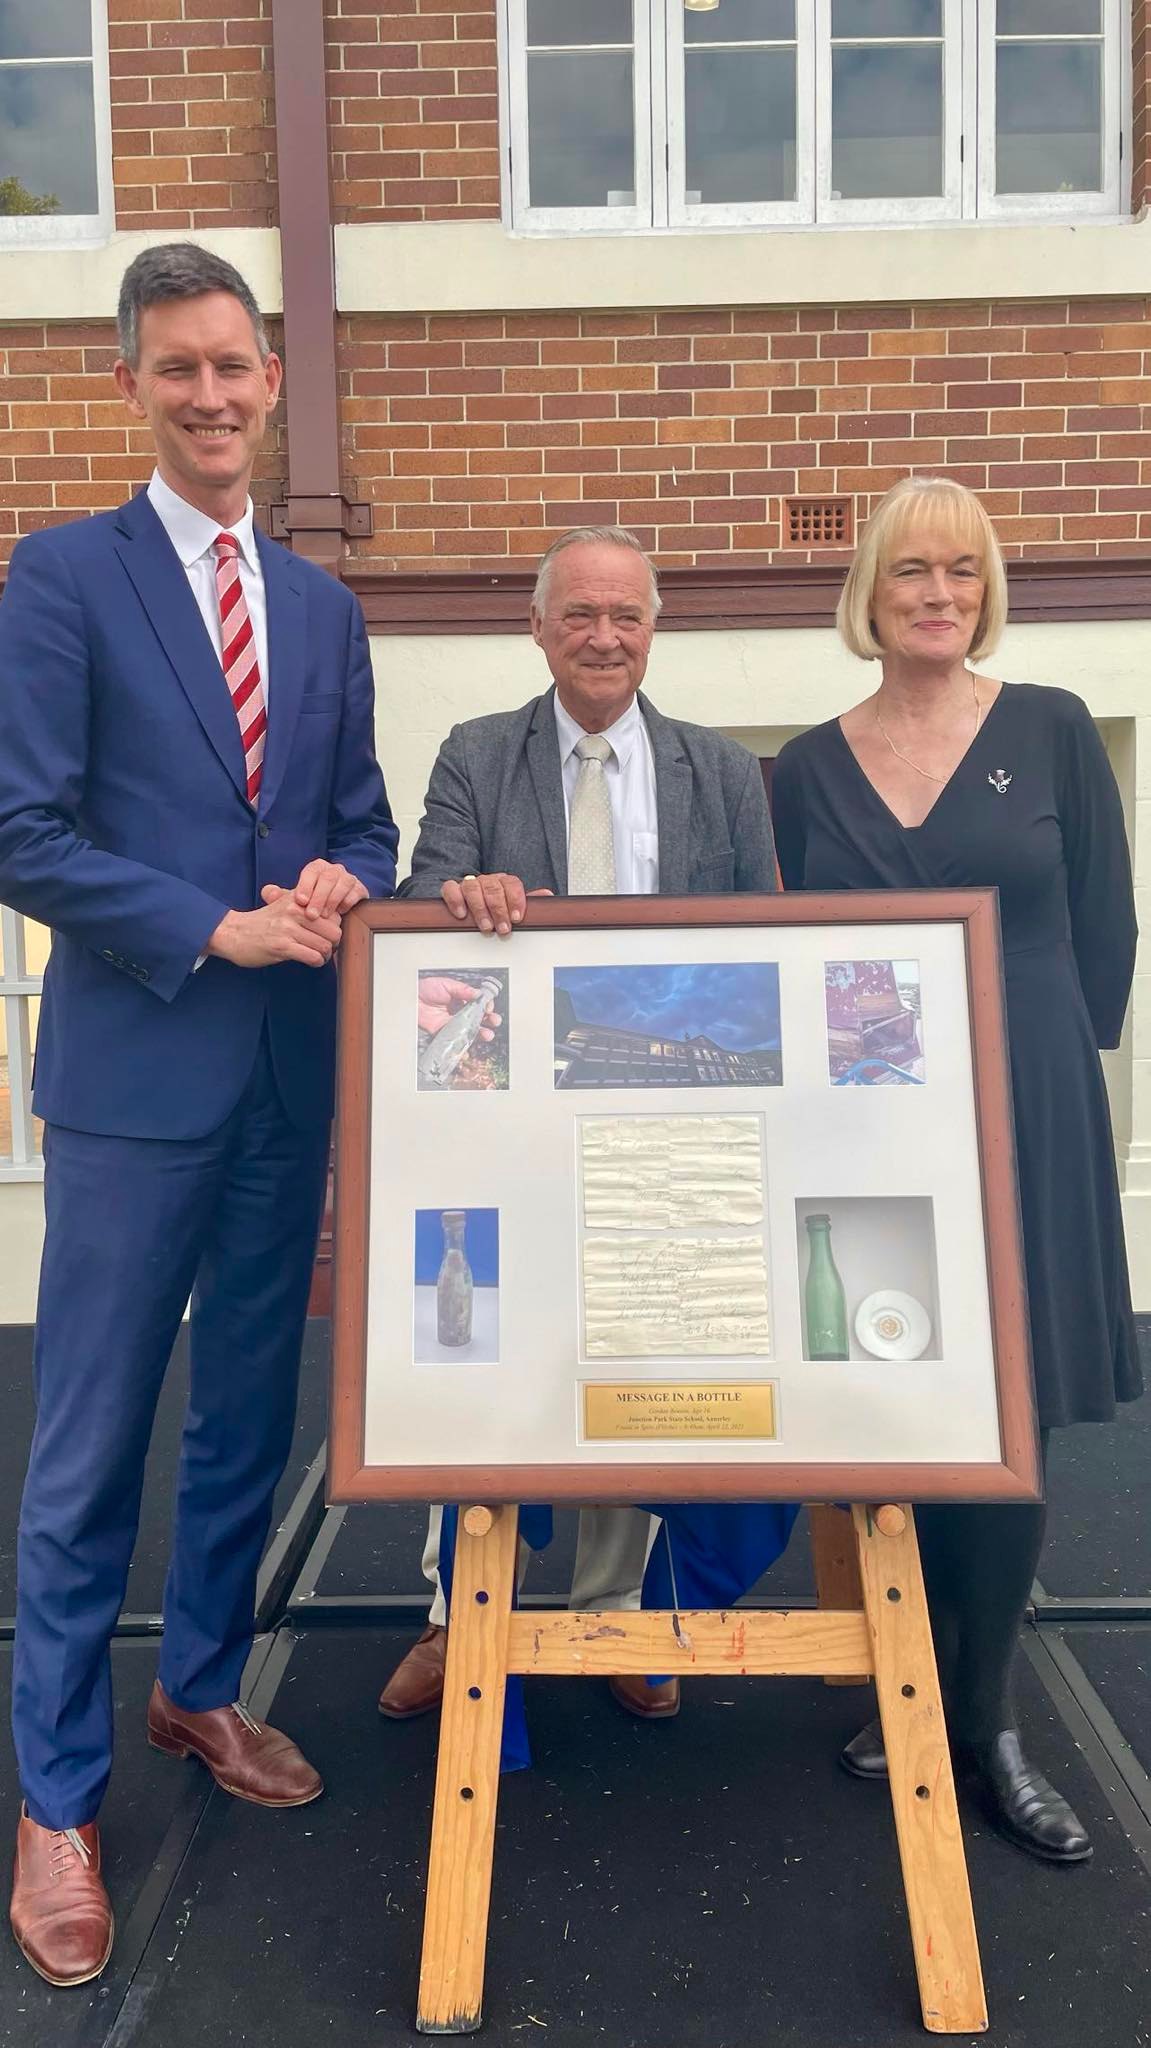 mark bailey, transport minister of australia, smiling as he poses with geoffrey benson and marilyn blundell. they're all standing behind the display cases featuring their dad's letter and bottle.